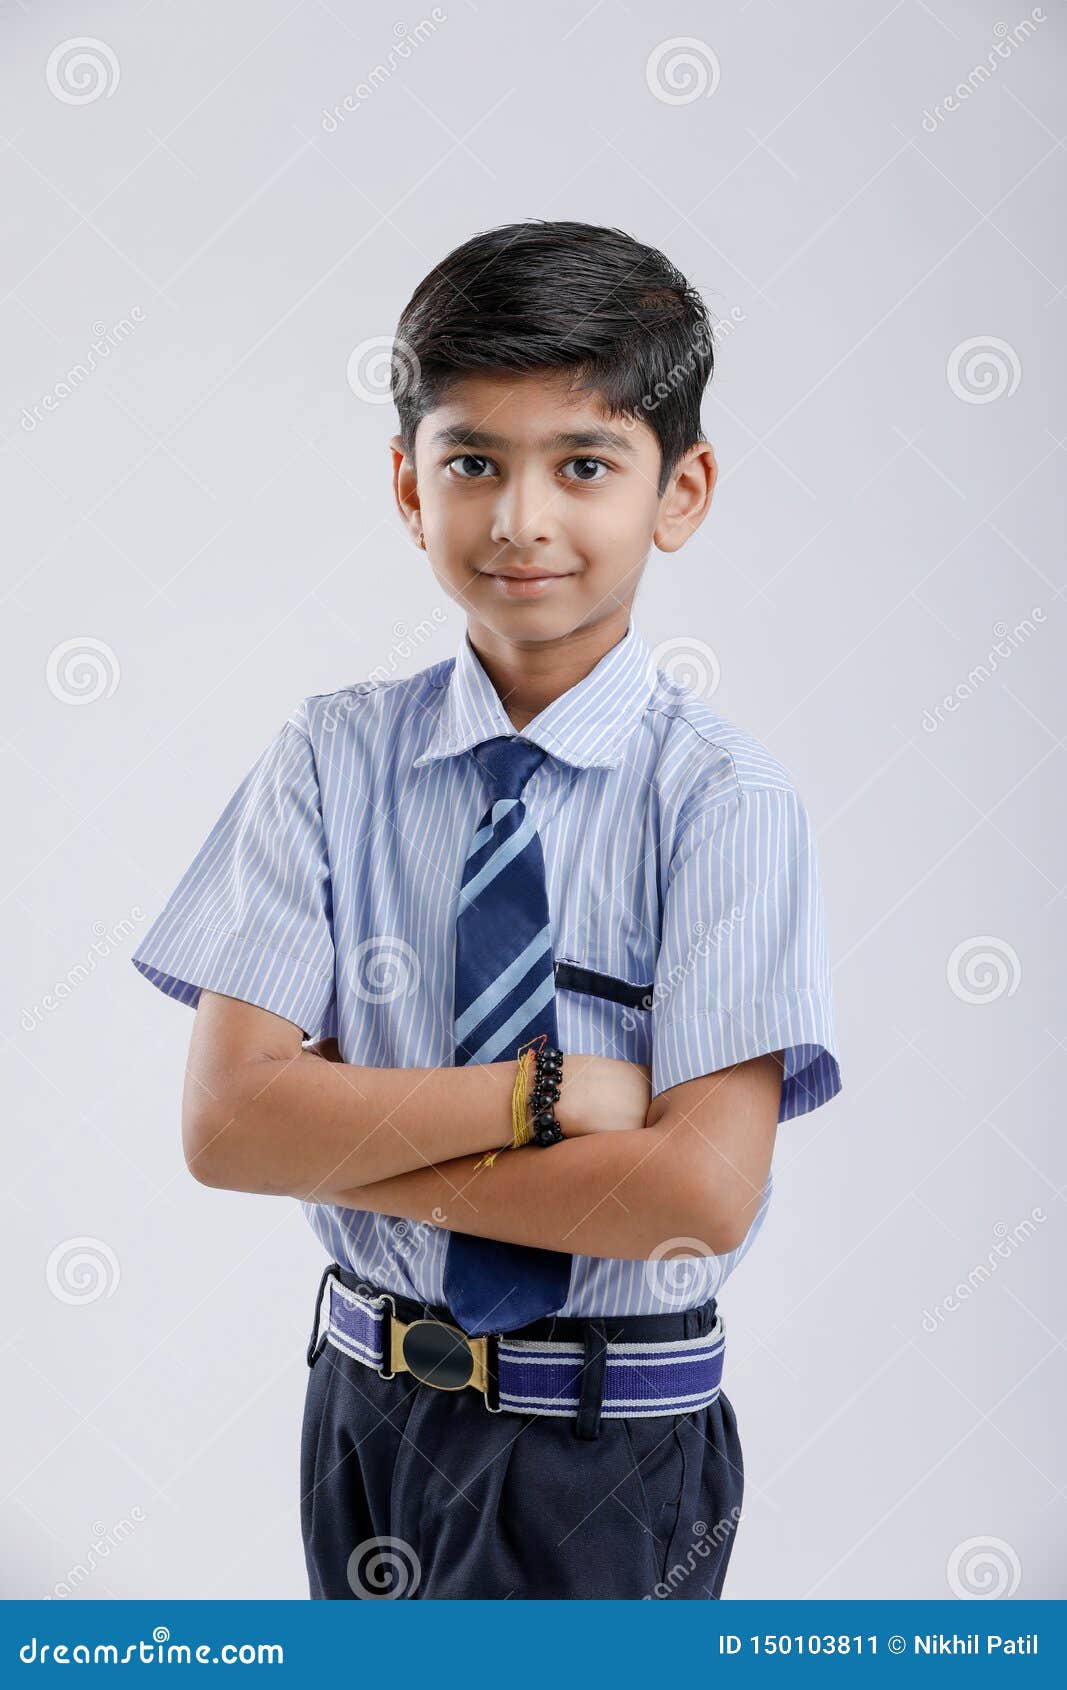 Cute Little Indian / Asian School Boy Wearing Uniform And Spectacles Stock  Photo, Picture and Royalty Free Image. Image 124419158.